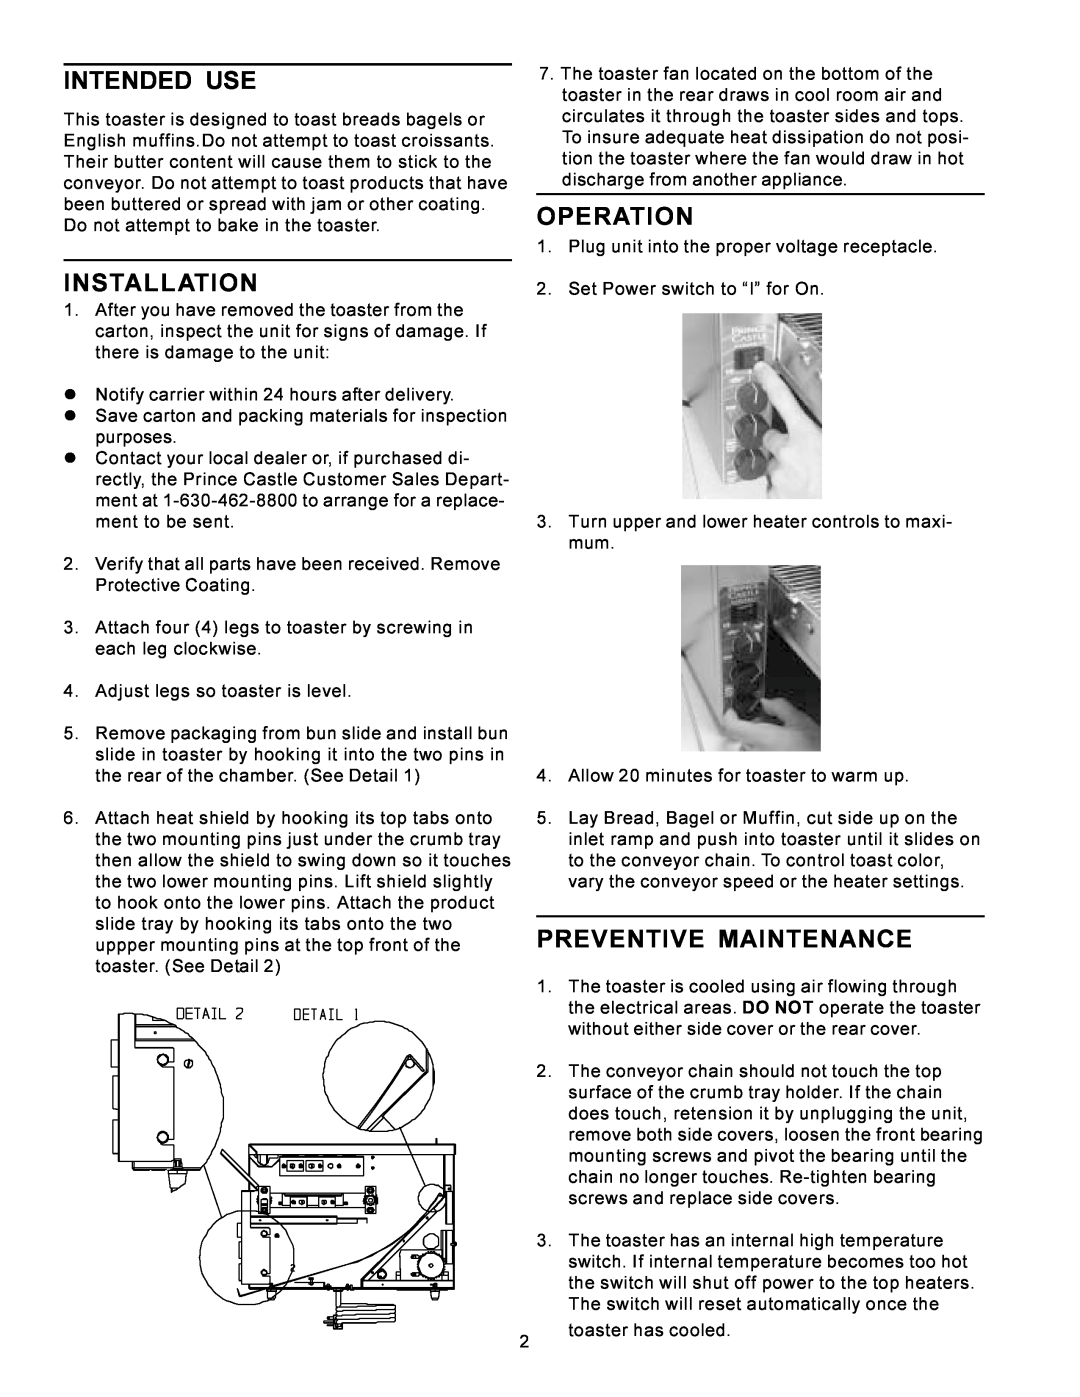 Prince Castle 428 operating instructions Intended Use, Operation, Installation, Preventive Maintenance 